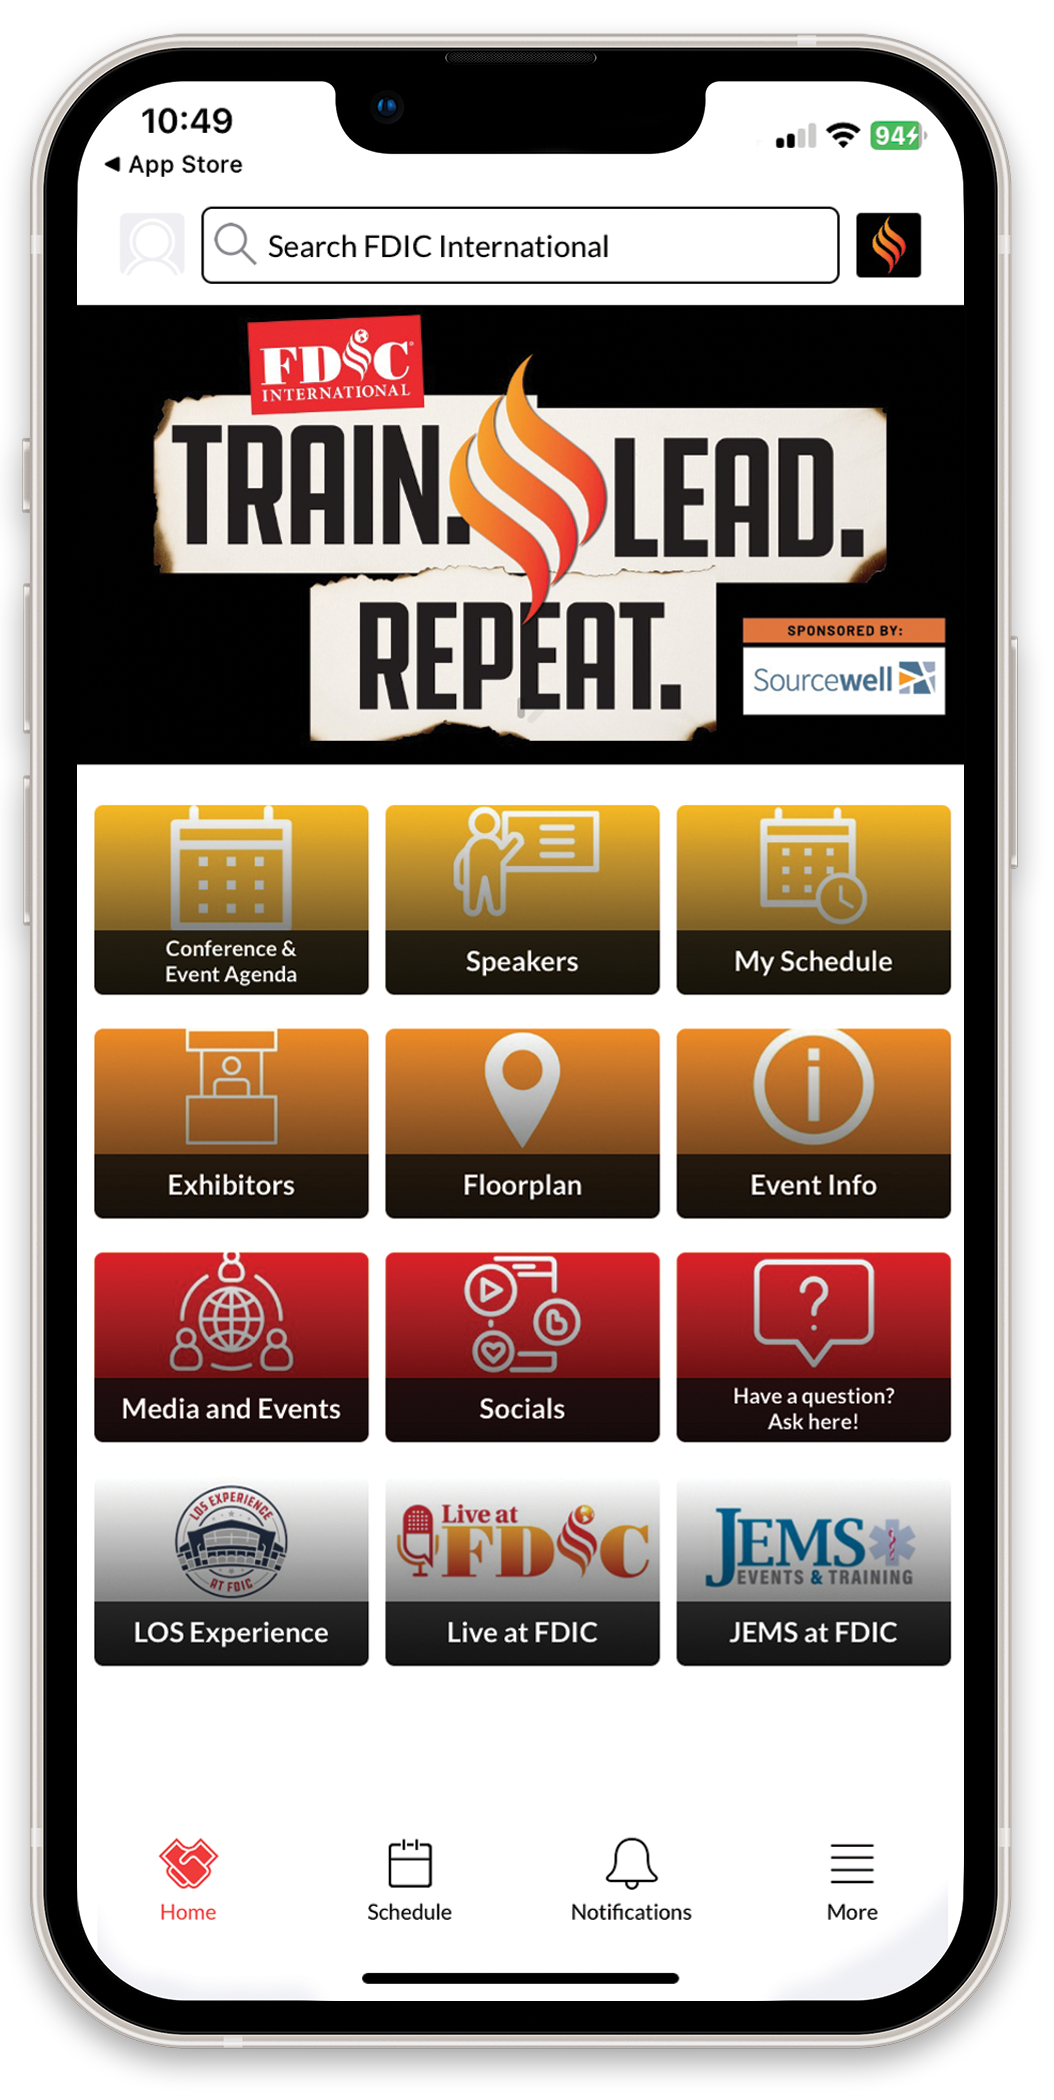 Download the FDIC International mobile app to stay connected!